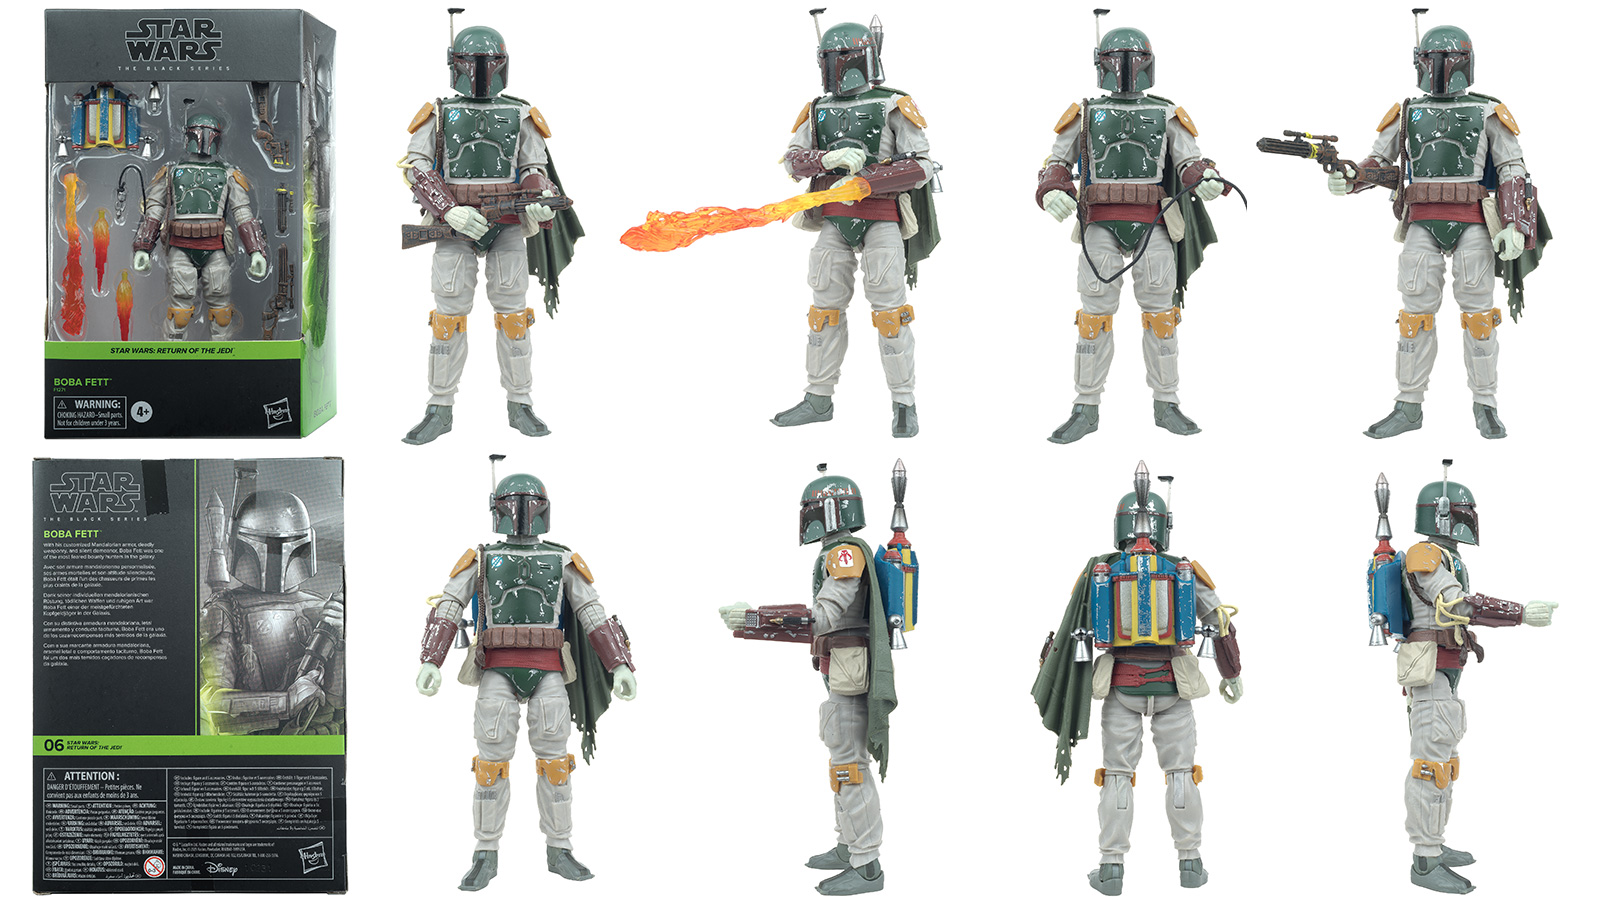 New Photos - The Black Series 6-Inch Deluxe ROTJ 06: Boba Fett